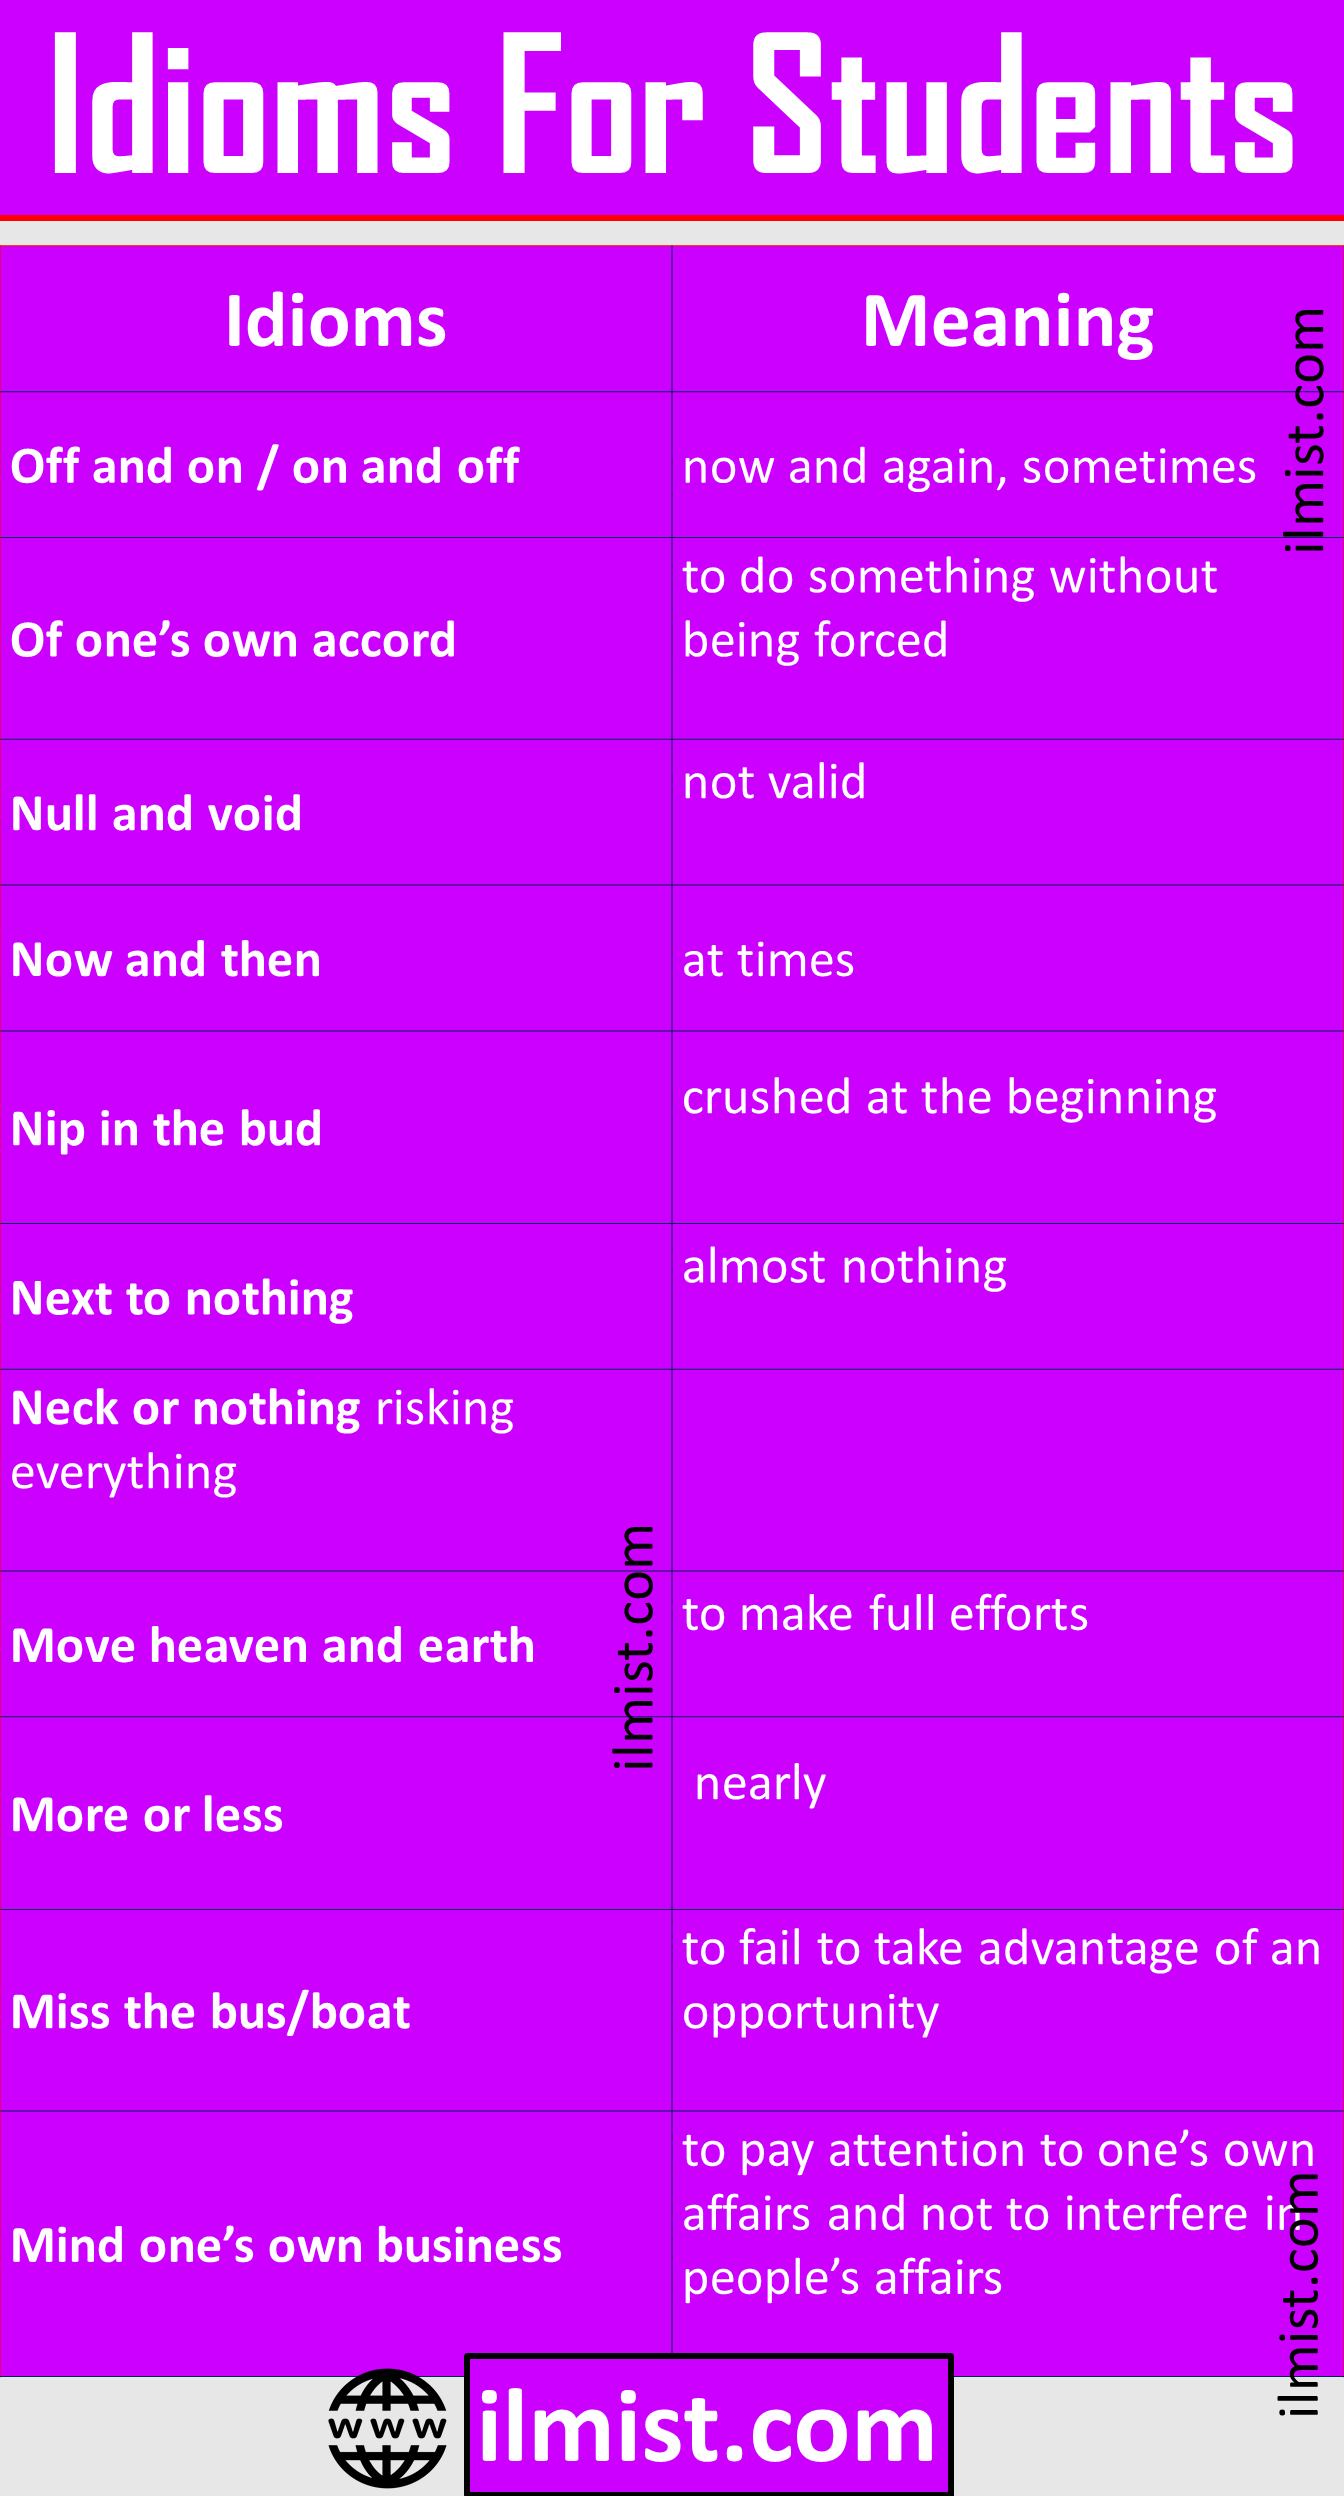 List Of Idioms For Students With Meanings and Examples